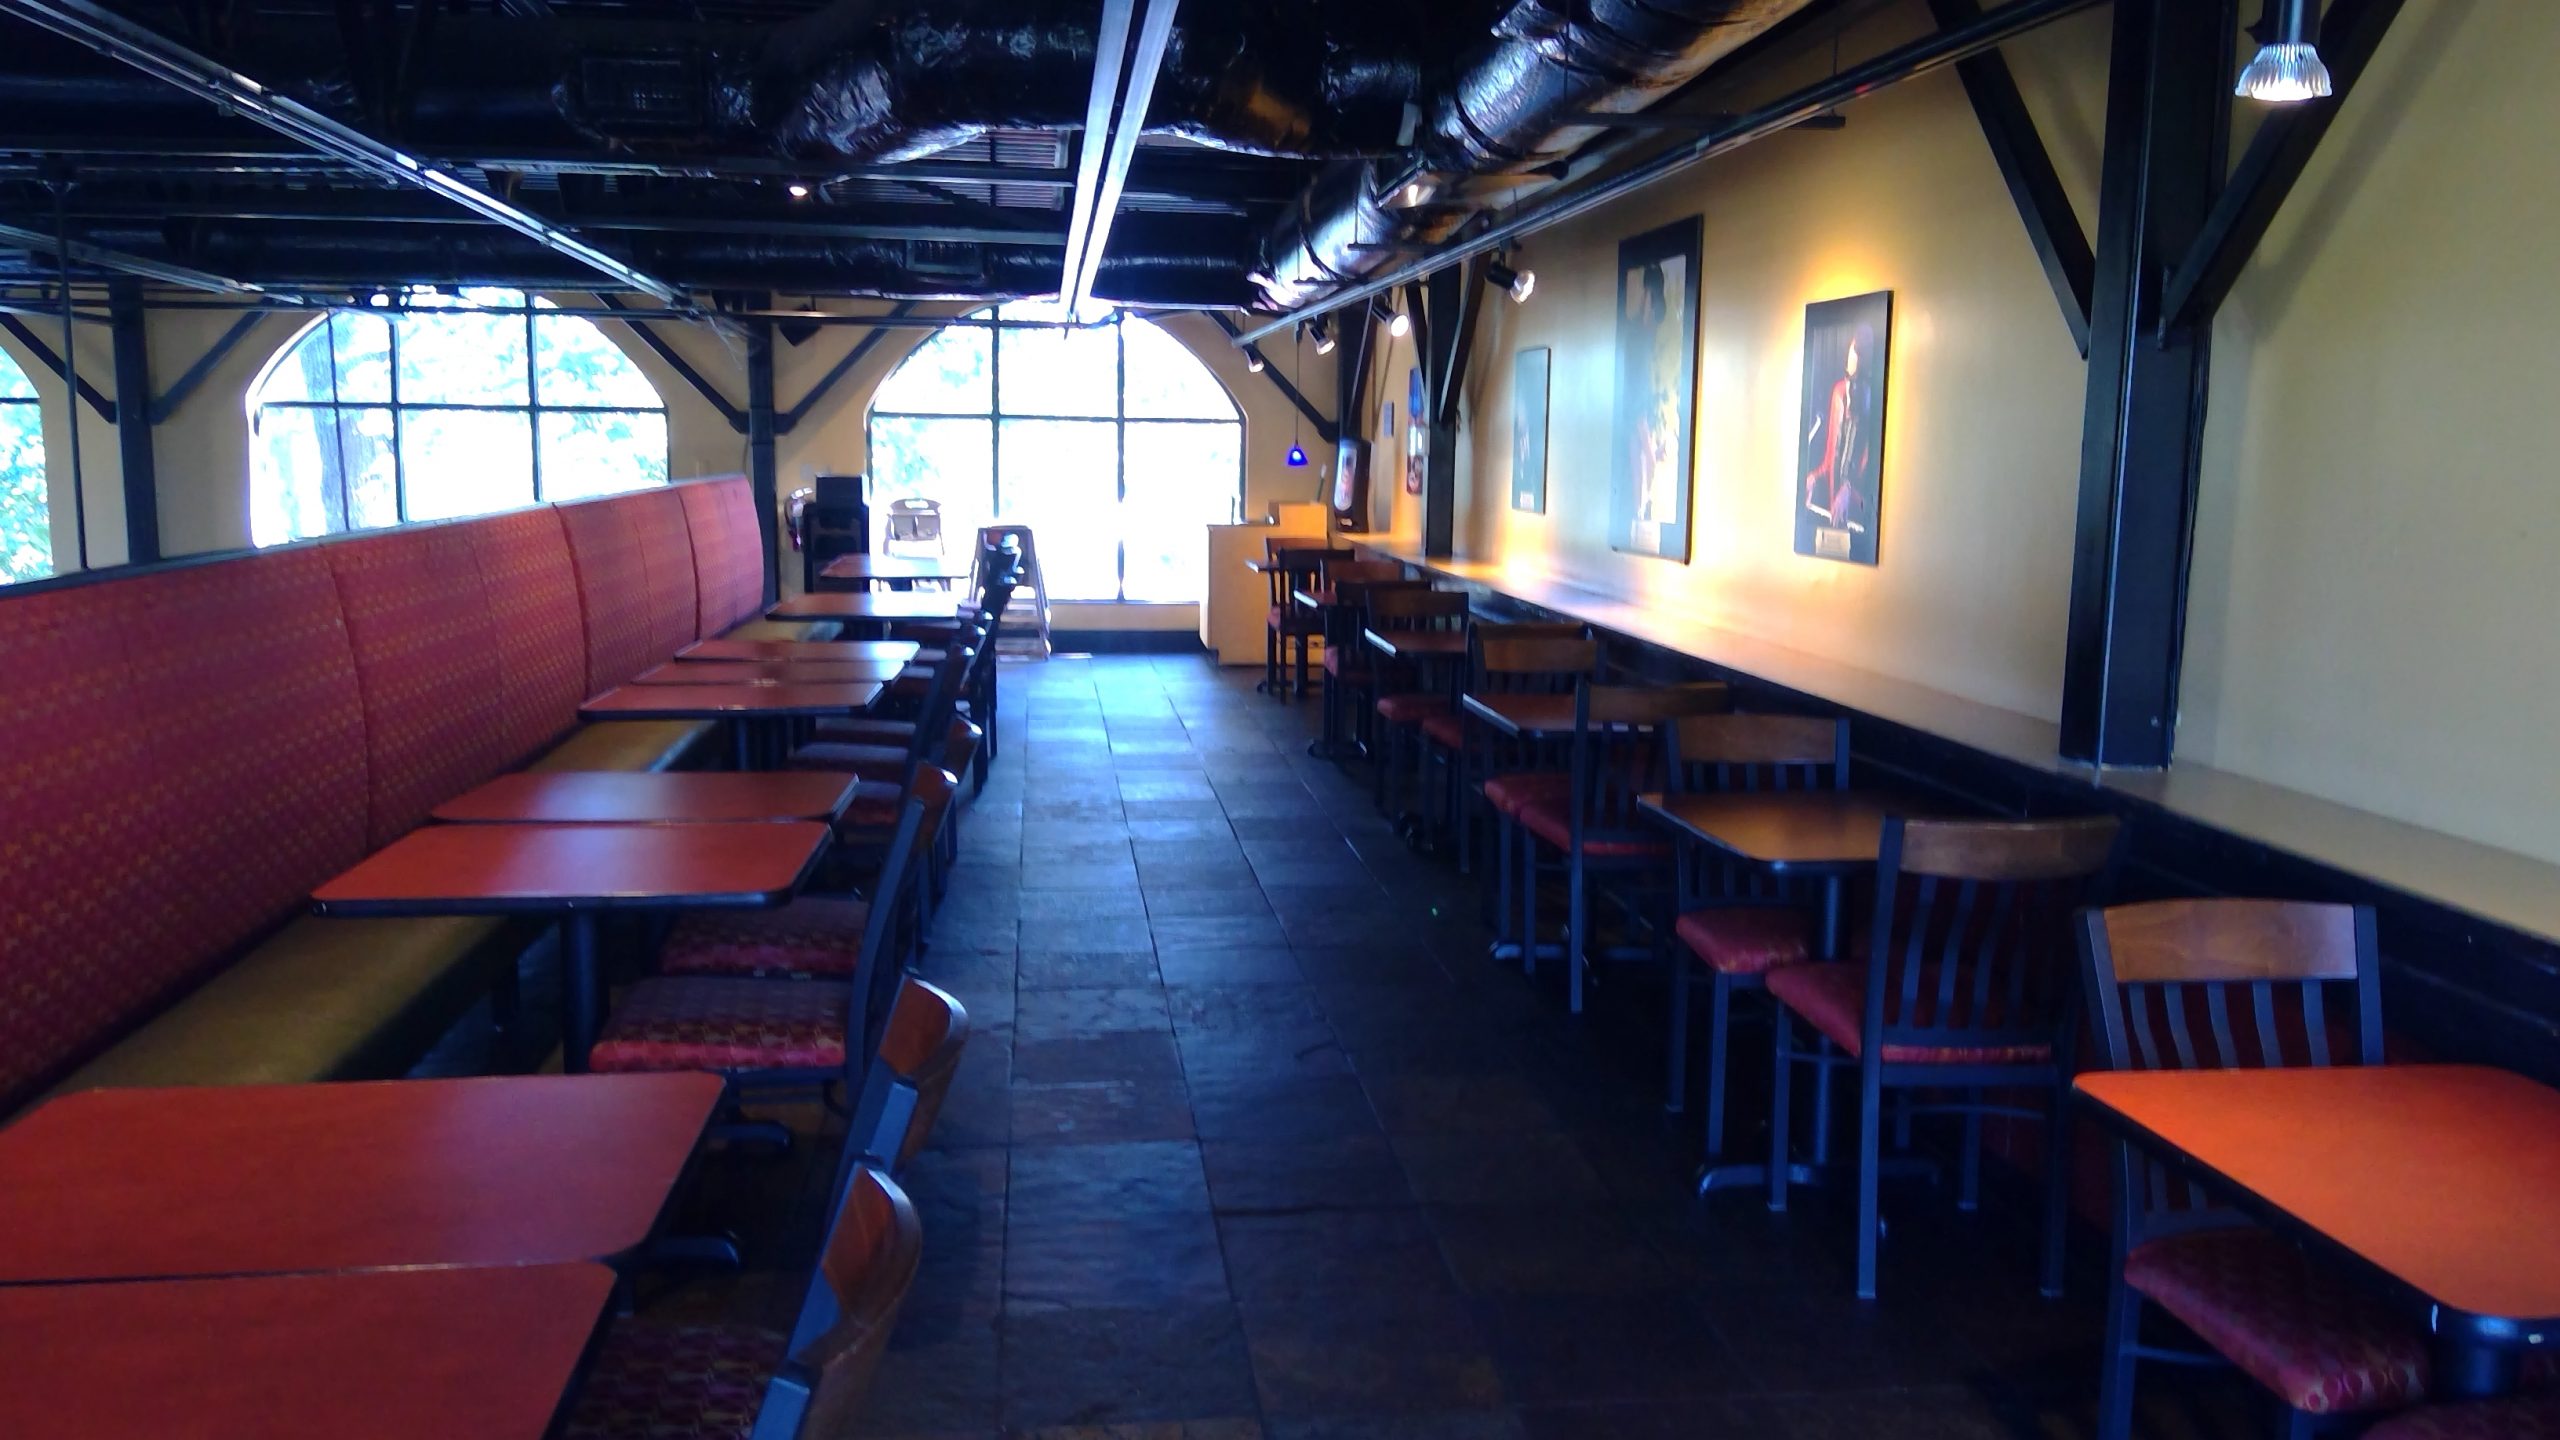 Moe’s Southwest Grill – Mount Pleasant, South Carolina Before